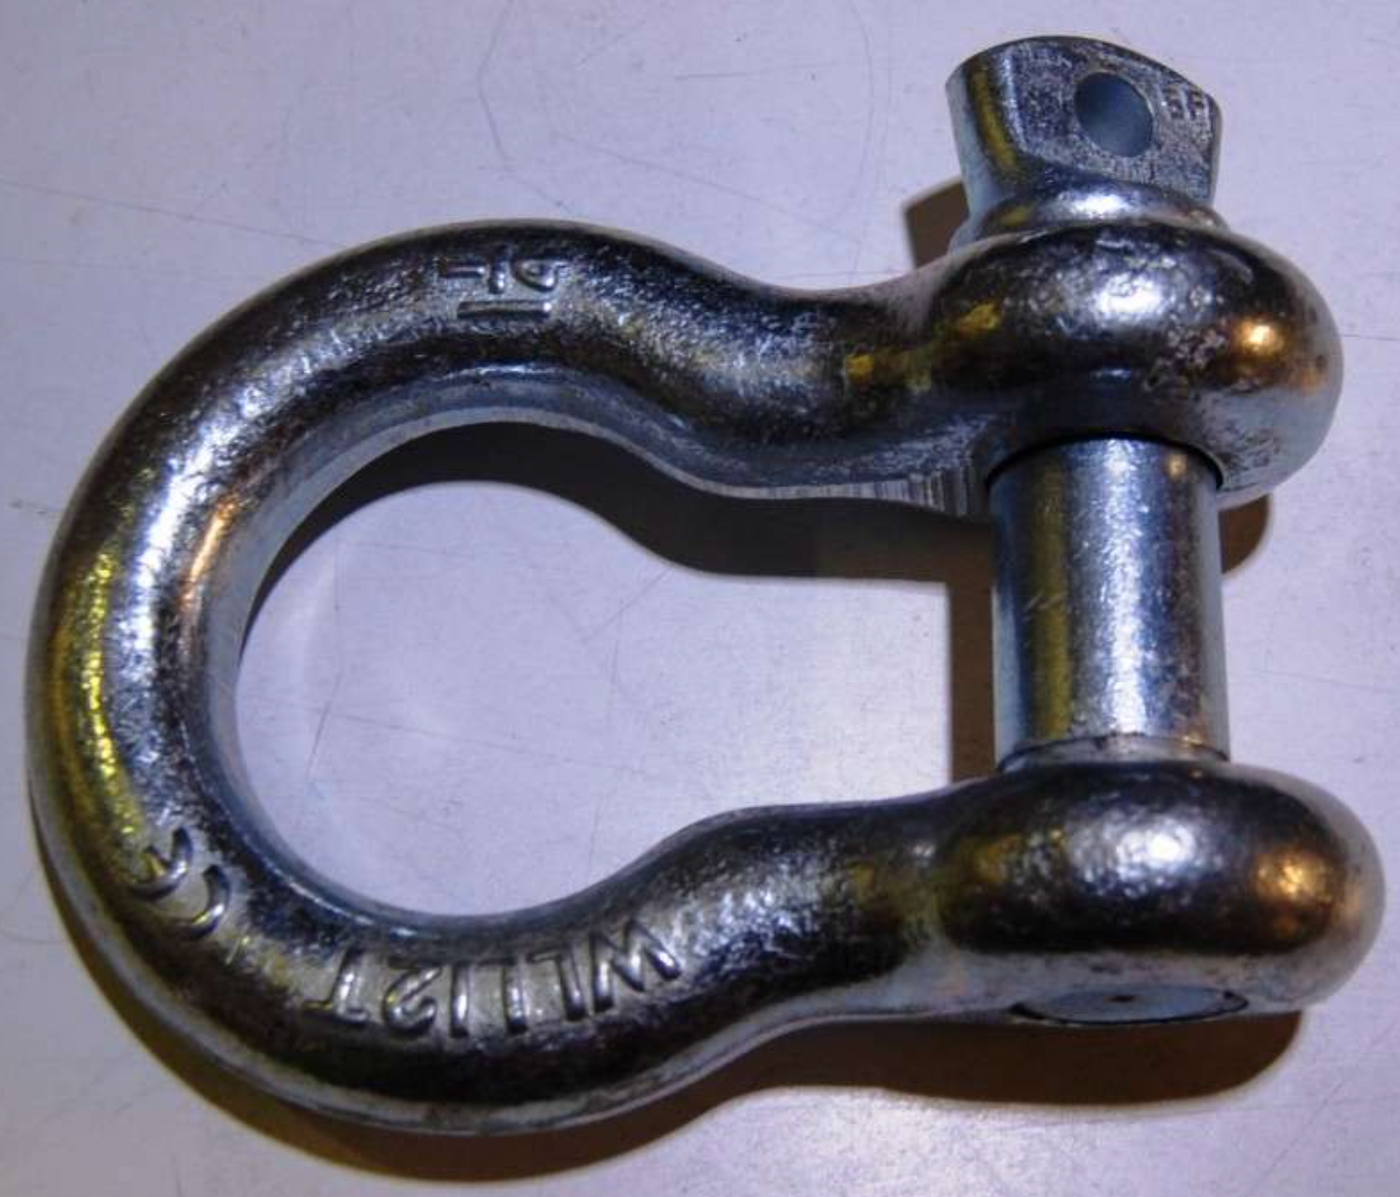 12 Tonne Shackle 1,1/4" rated for use with the 75 Tonne Bridle